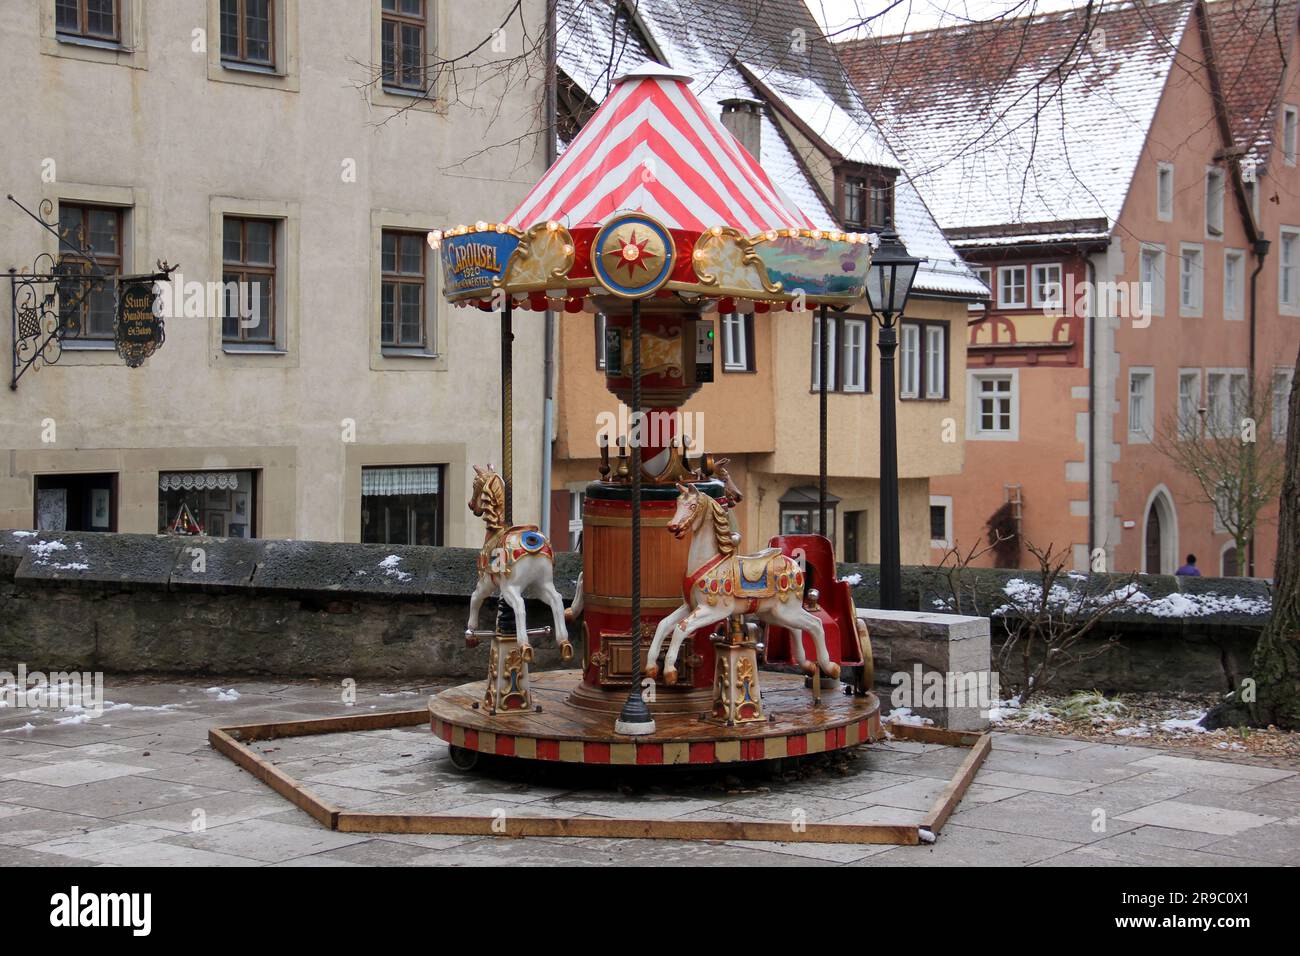 Old-times styled merry-go-round in the small square in the old town, snow covered gable roofed townhouses in the background, Rothenburg ob der Tauber Stock Photo